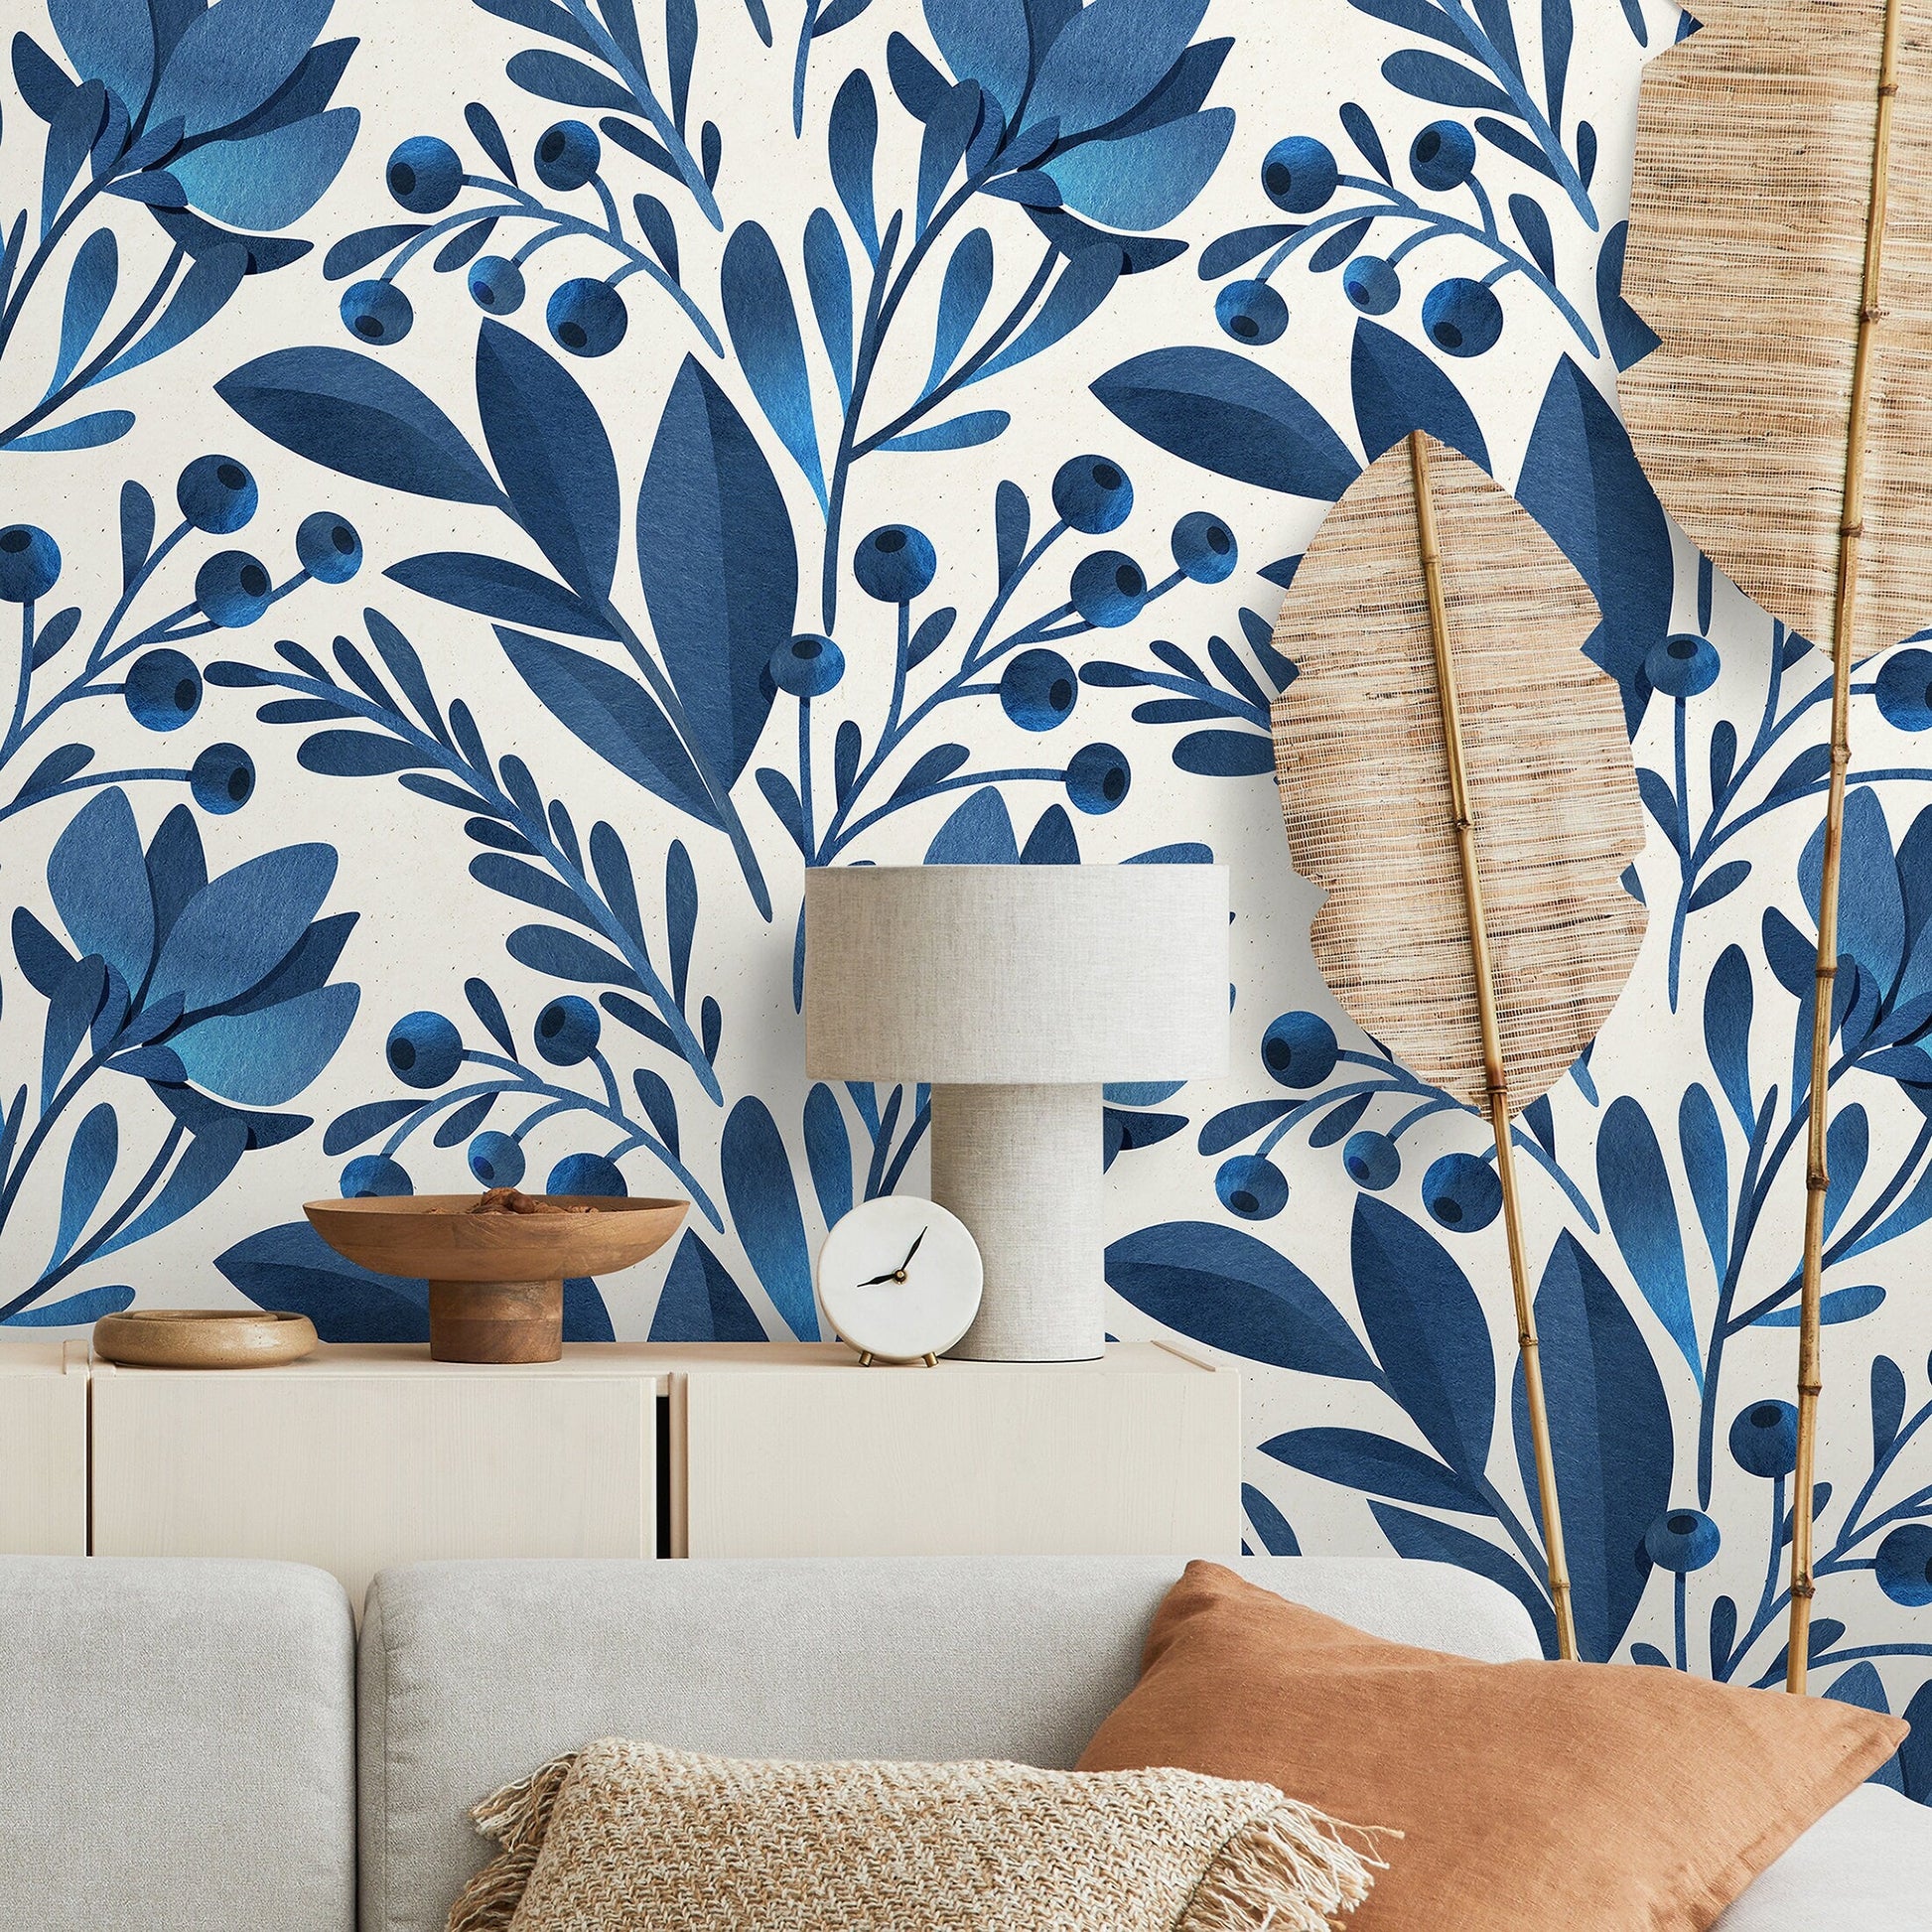 Removable Wallpaper Peel and Stick Wallpaper Wall Paper Wall Mural - Leaf Wallpaper Tropical Wallpaper - A371